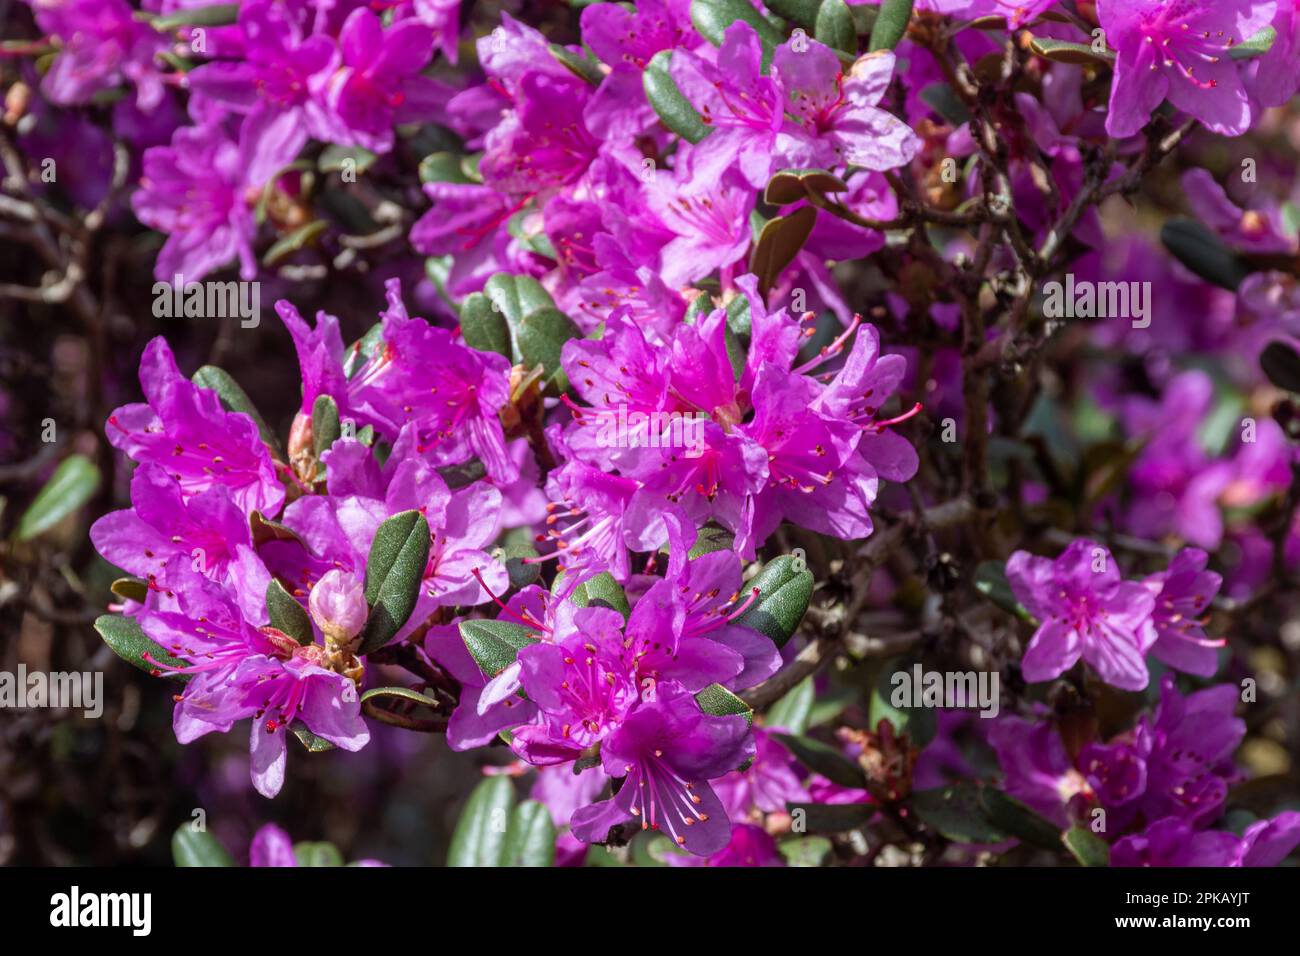 Pink flowers or blooms of the evergreen shrub Rhododendron cuneatum during spring or April, UK Stock Photo